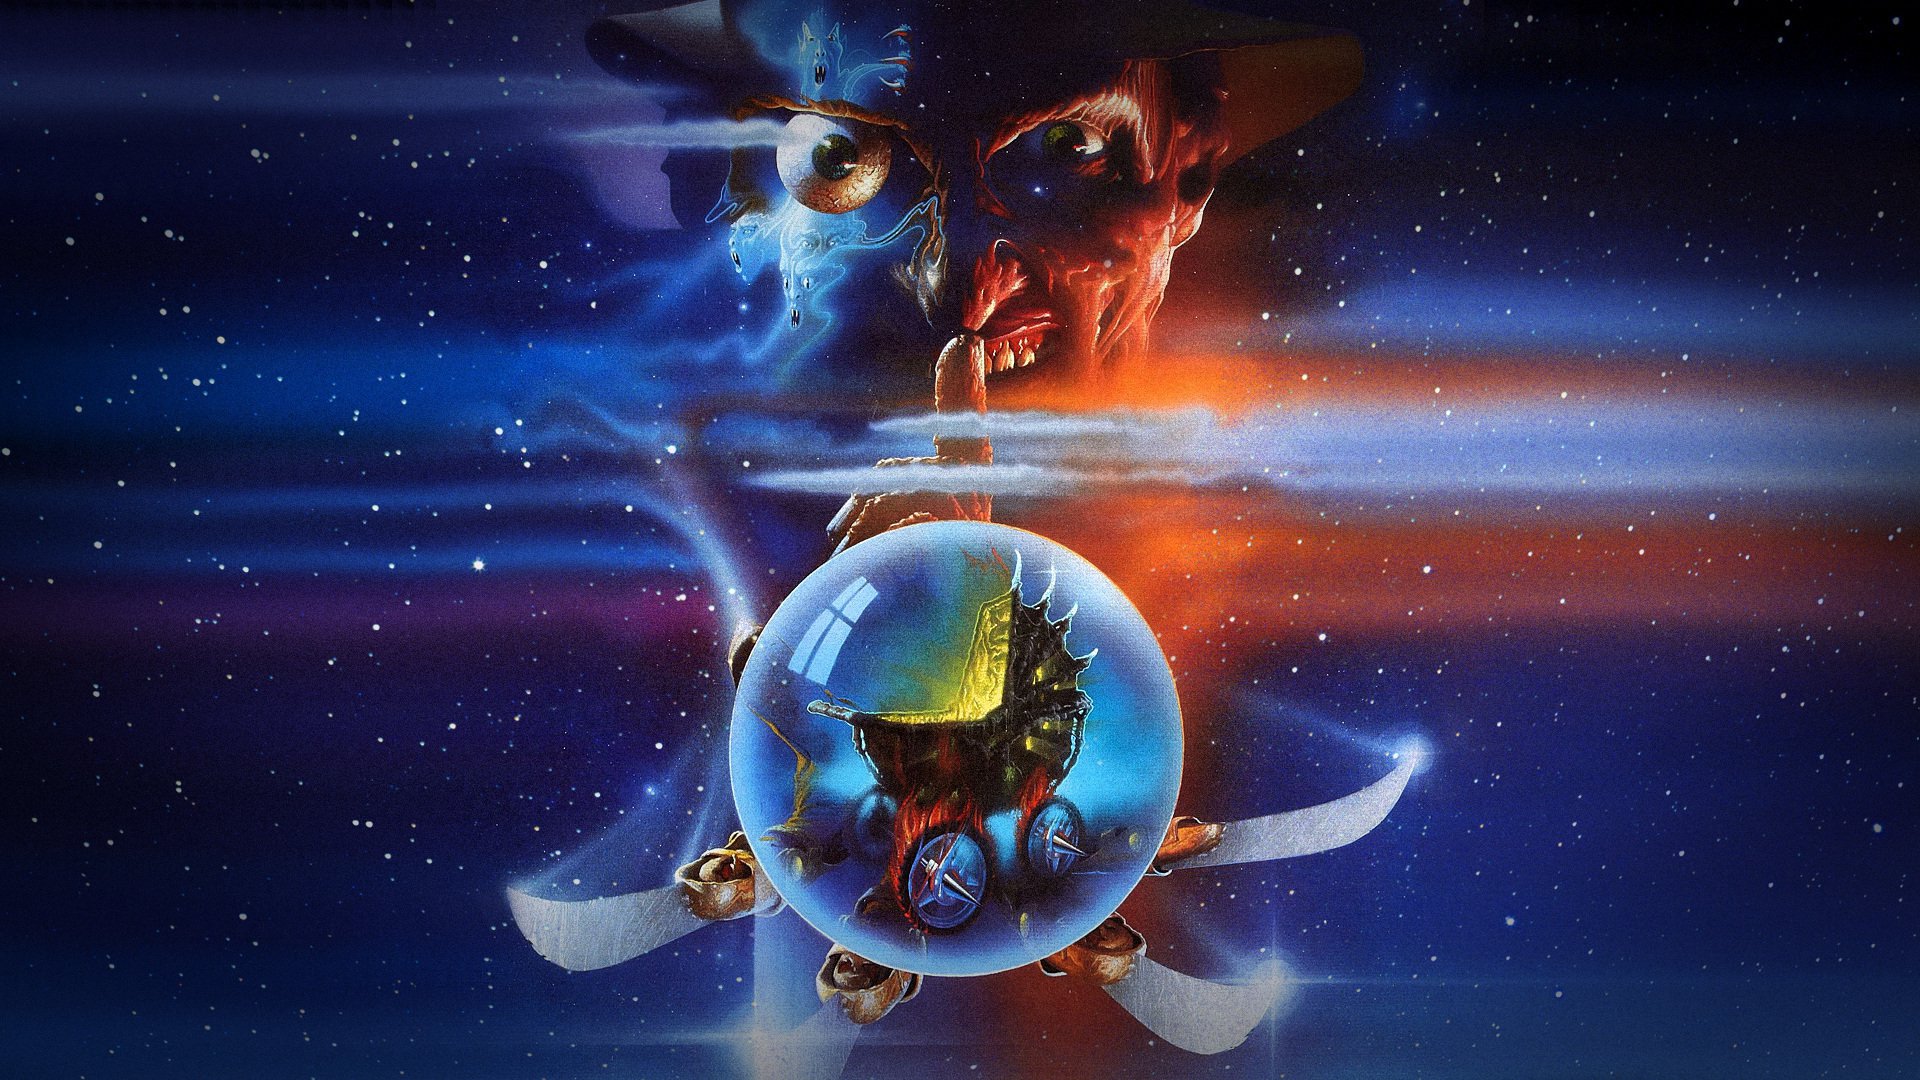 Movie A Nightmare On Elm Street 5: The Dream Child HD Wallpaper | Background Image